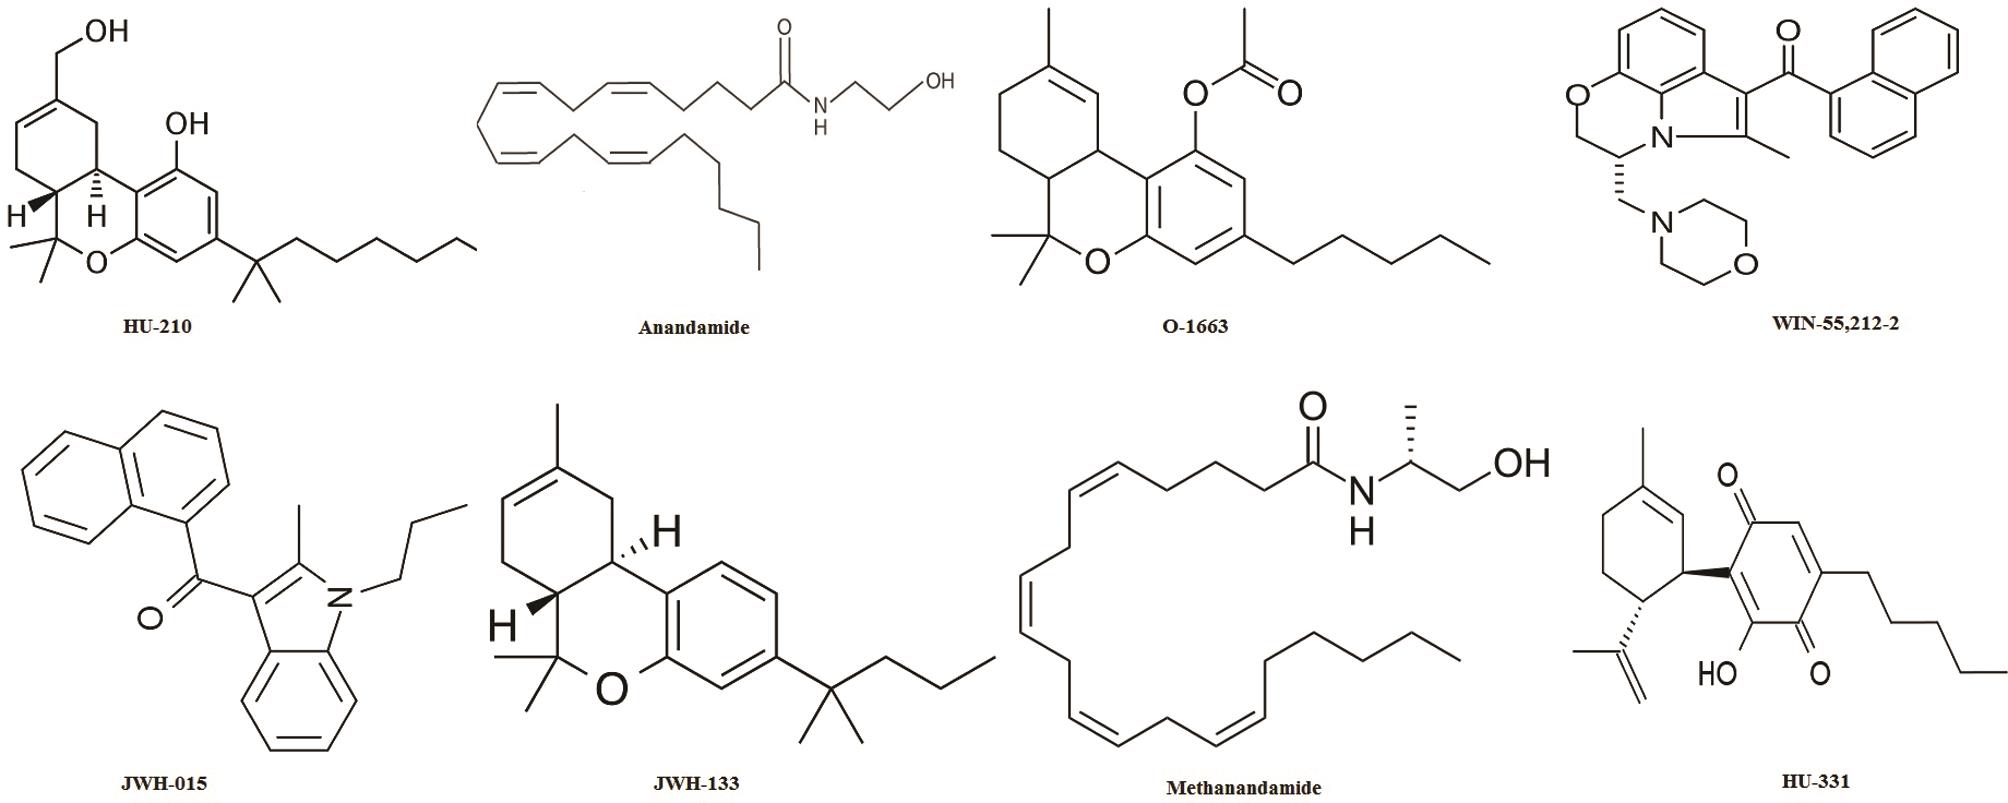 Structures of various cannabinoid analogues.